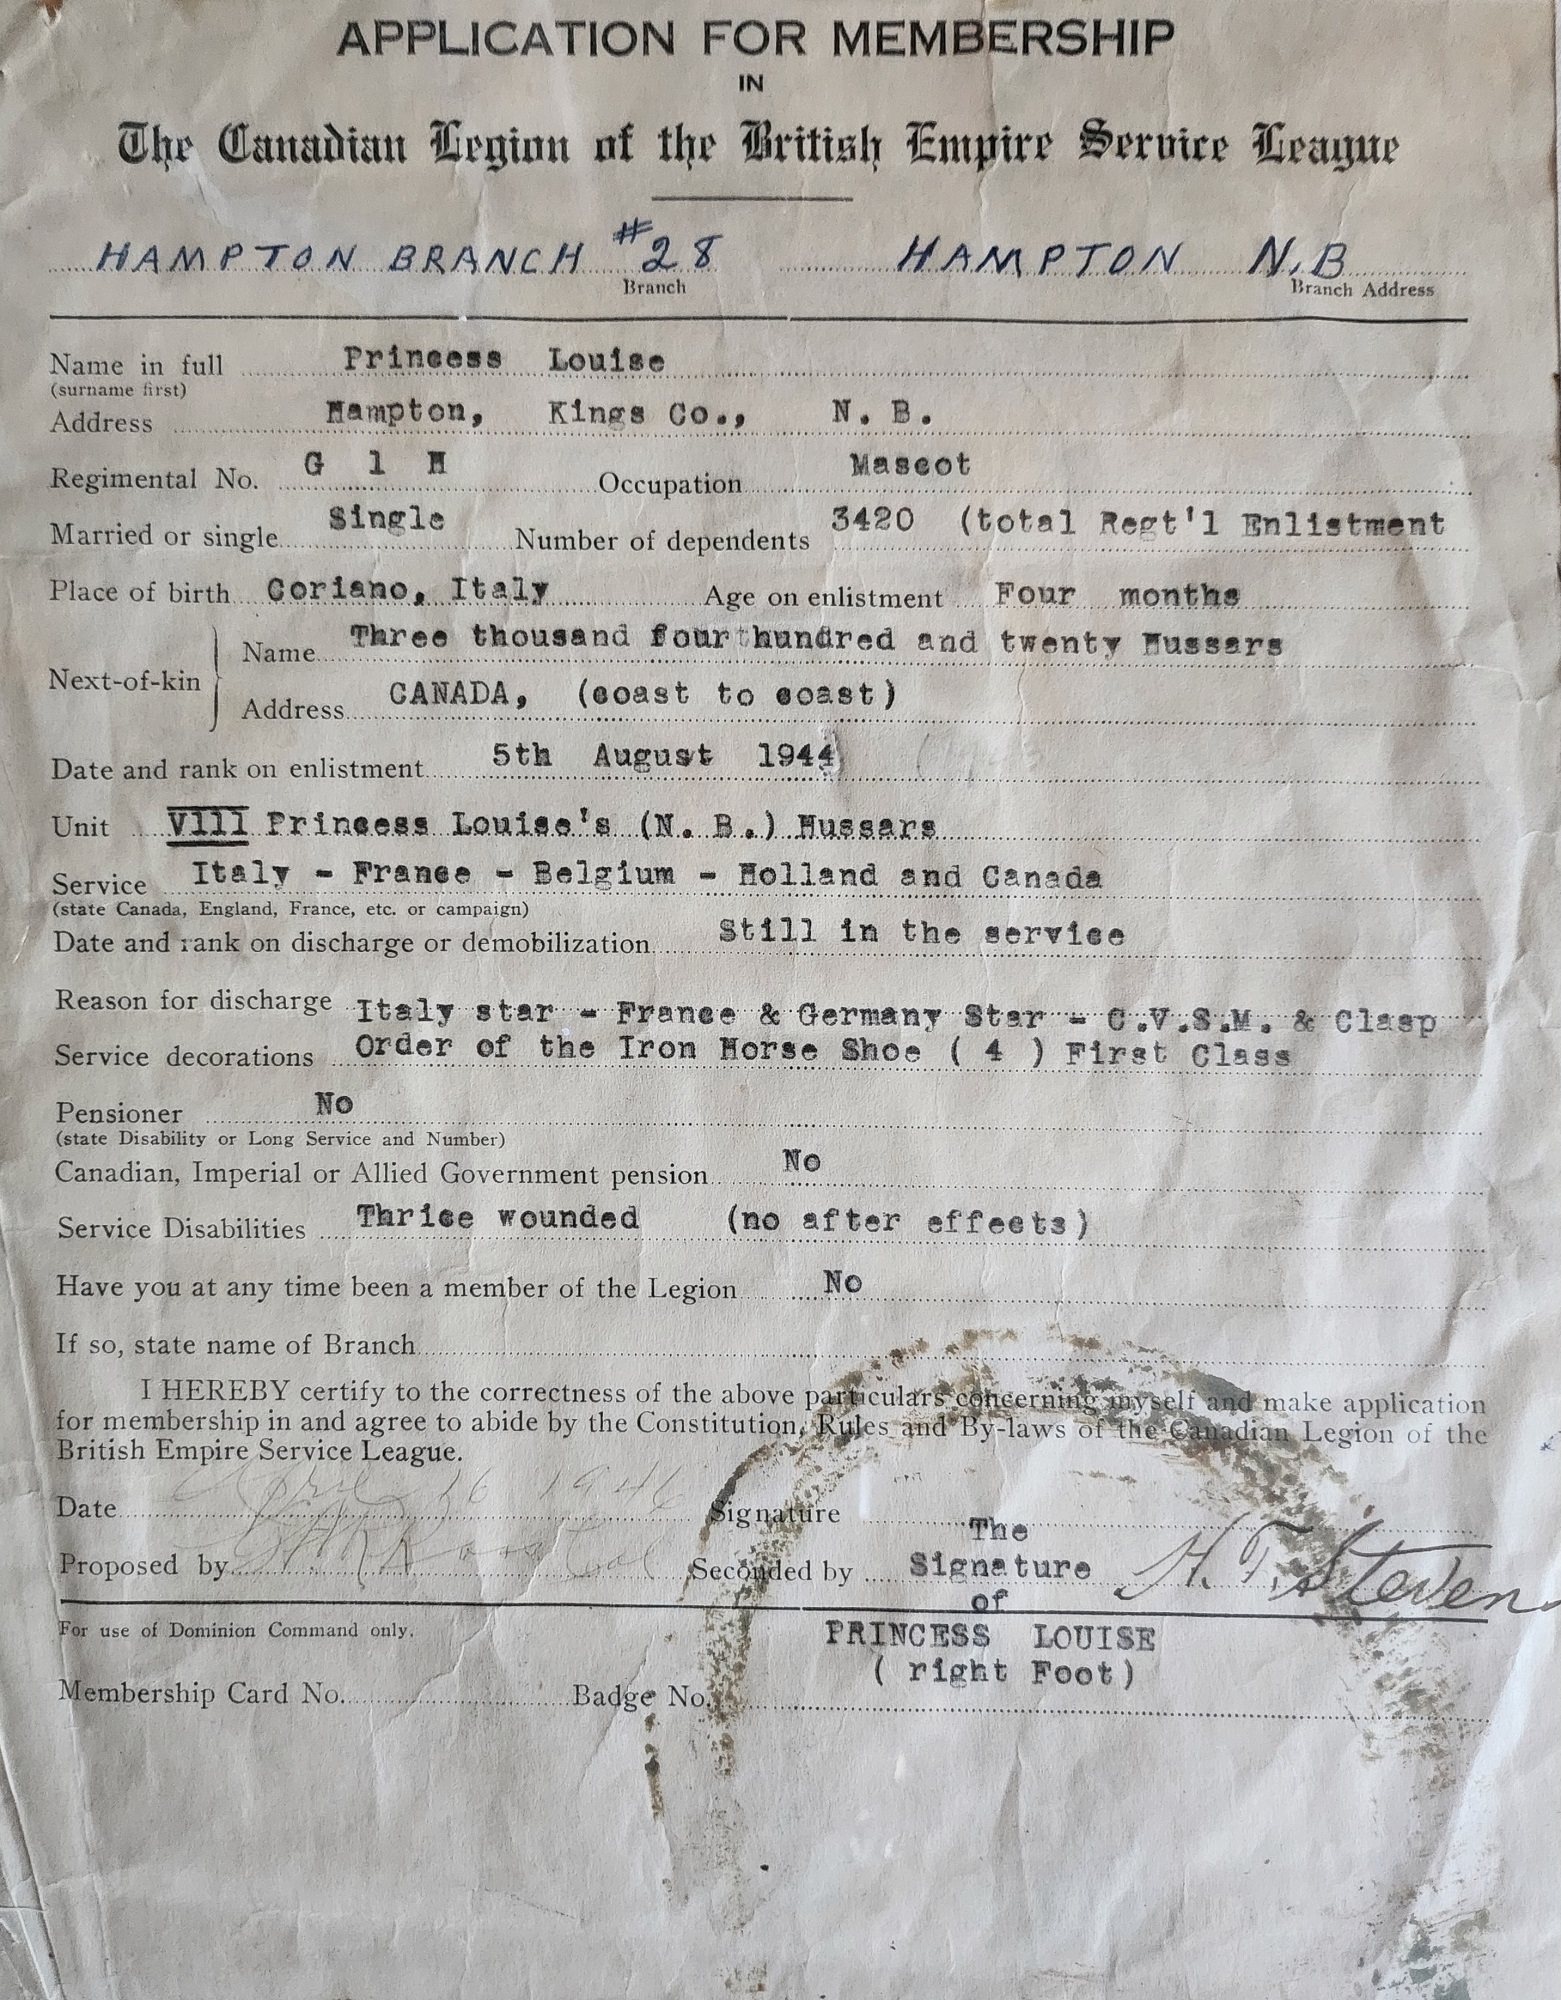 Princess Louise's legion application form with right hoof print, dated April 16, 1946.